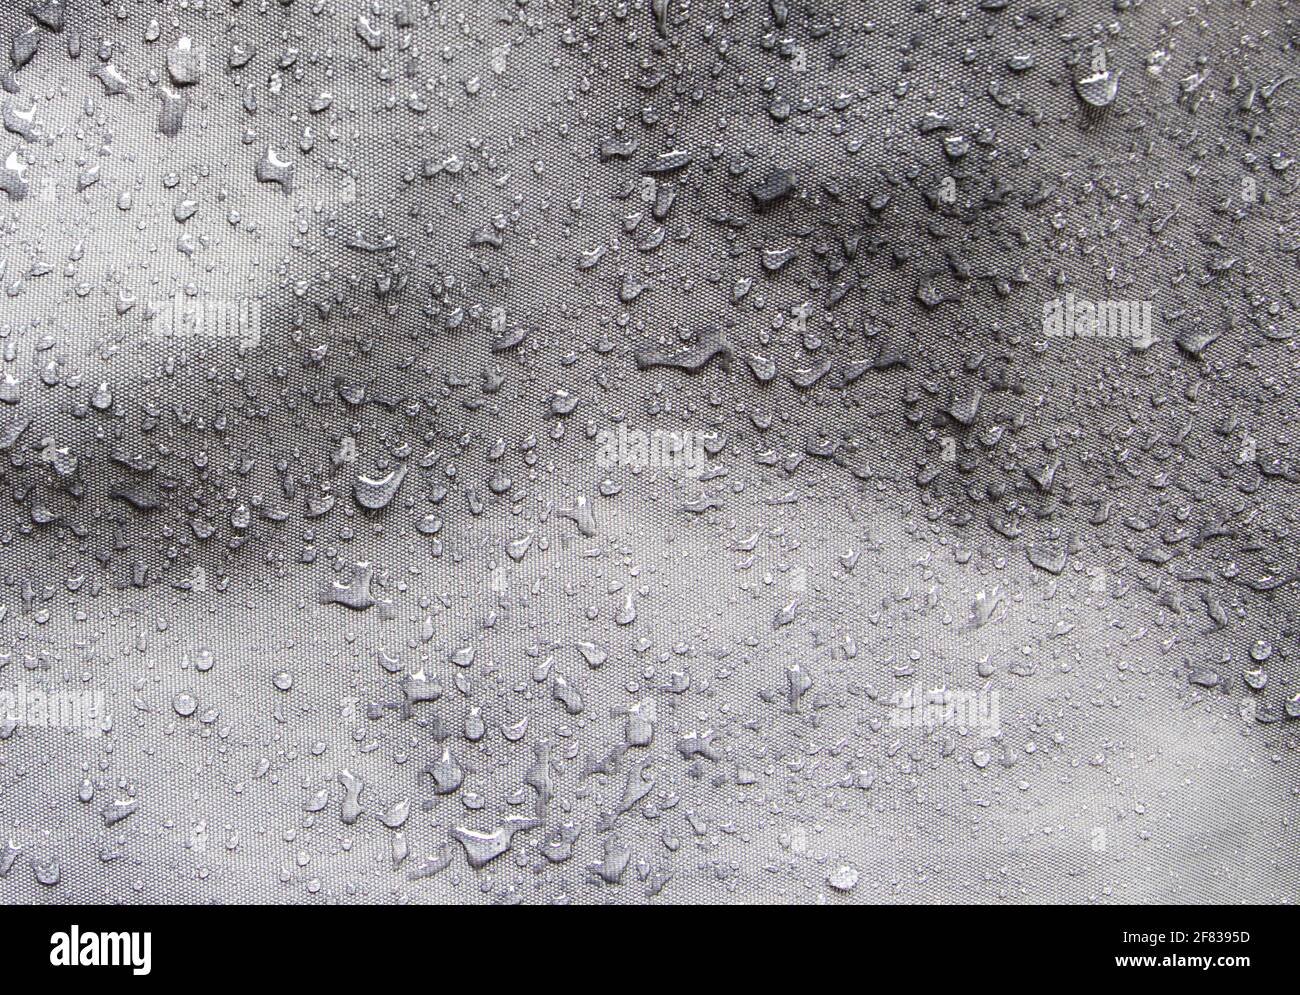 Waterproof gray nylon fabric covered with water drops after rain Stock Photo